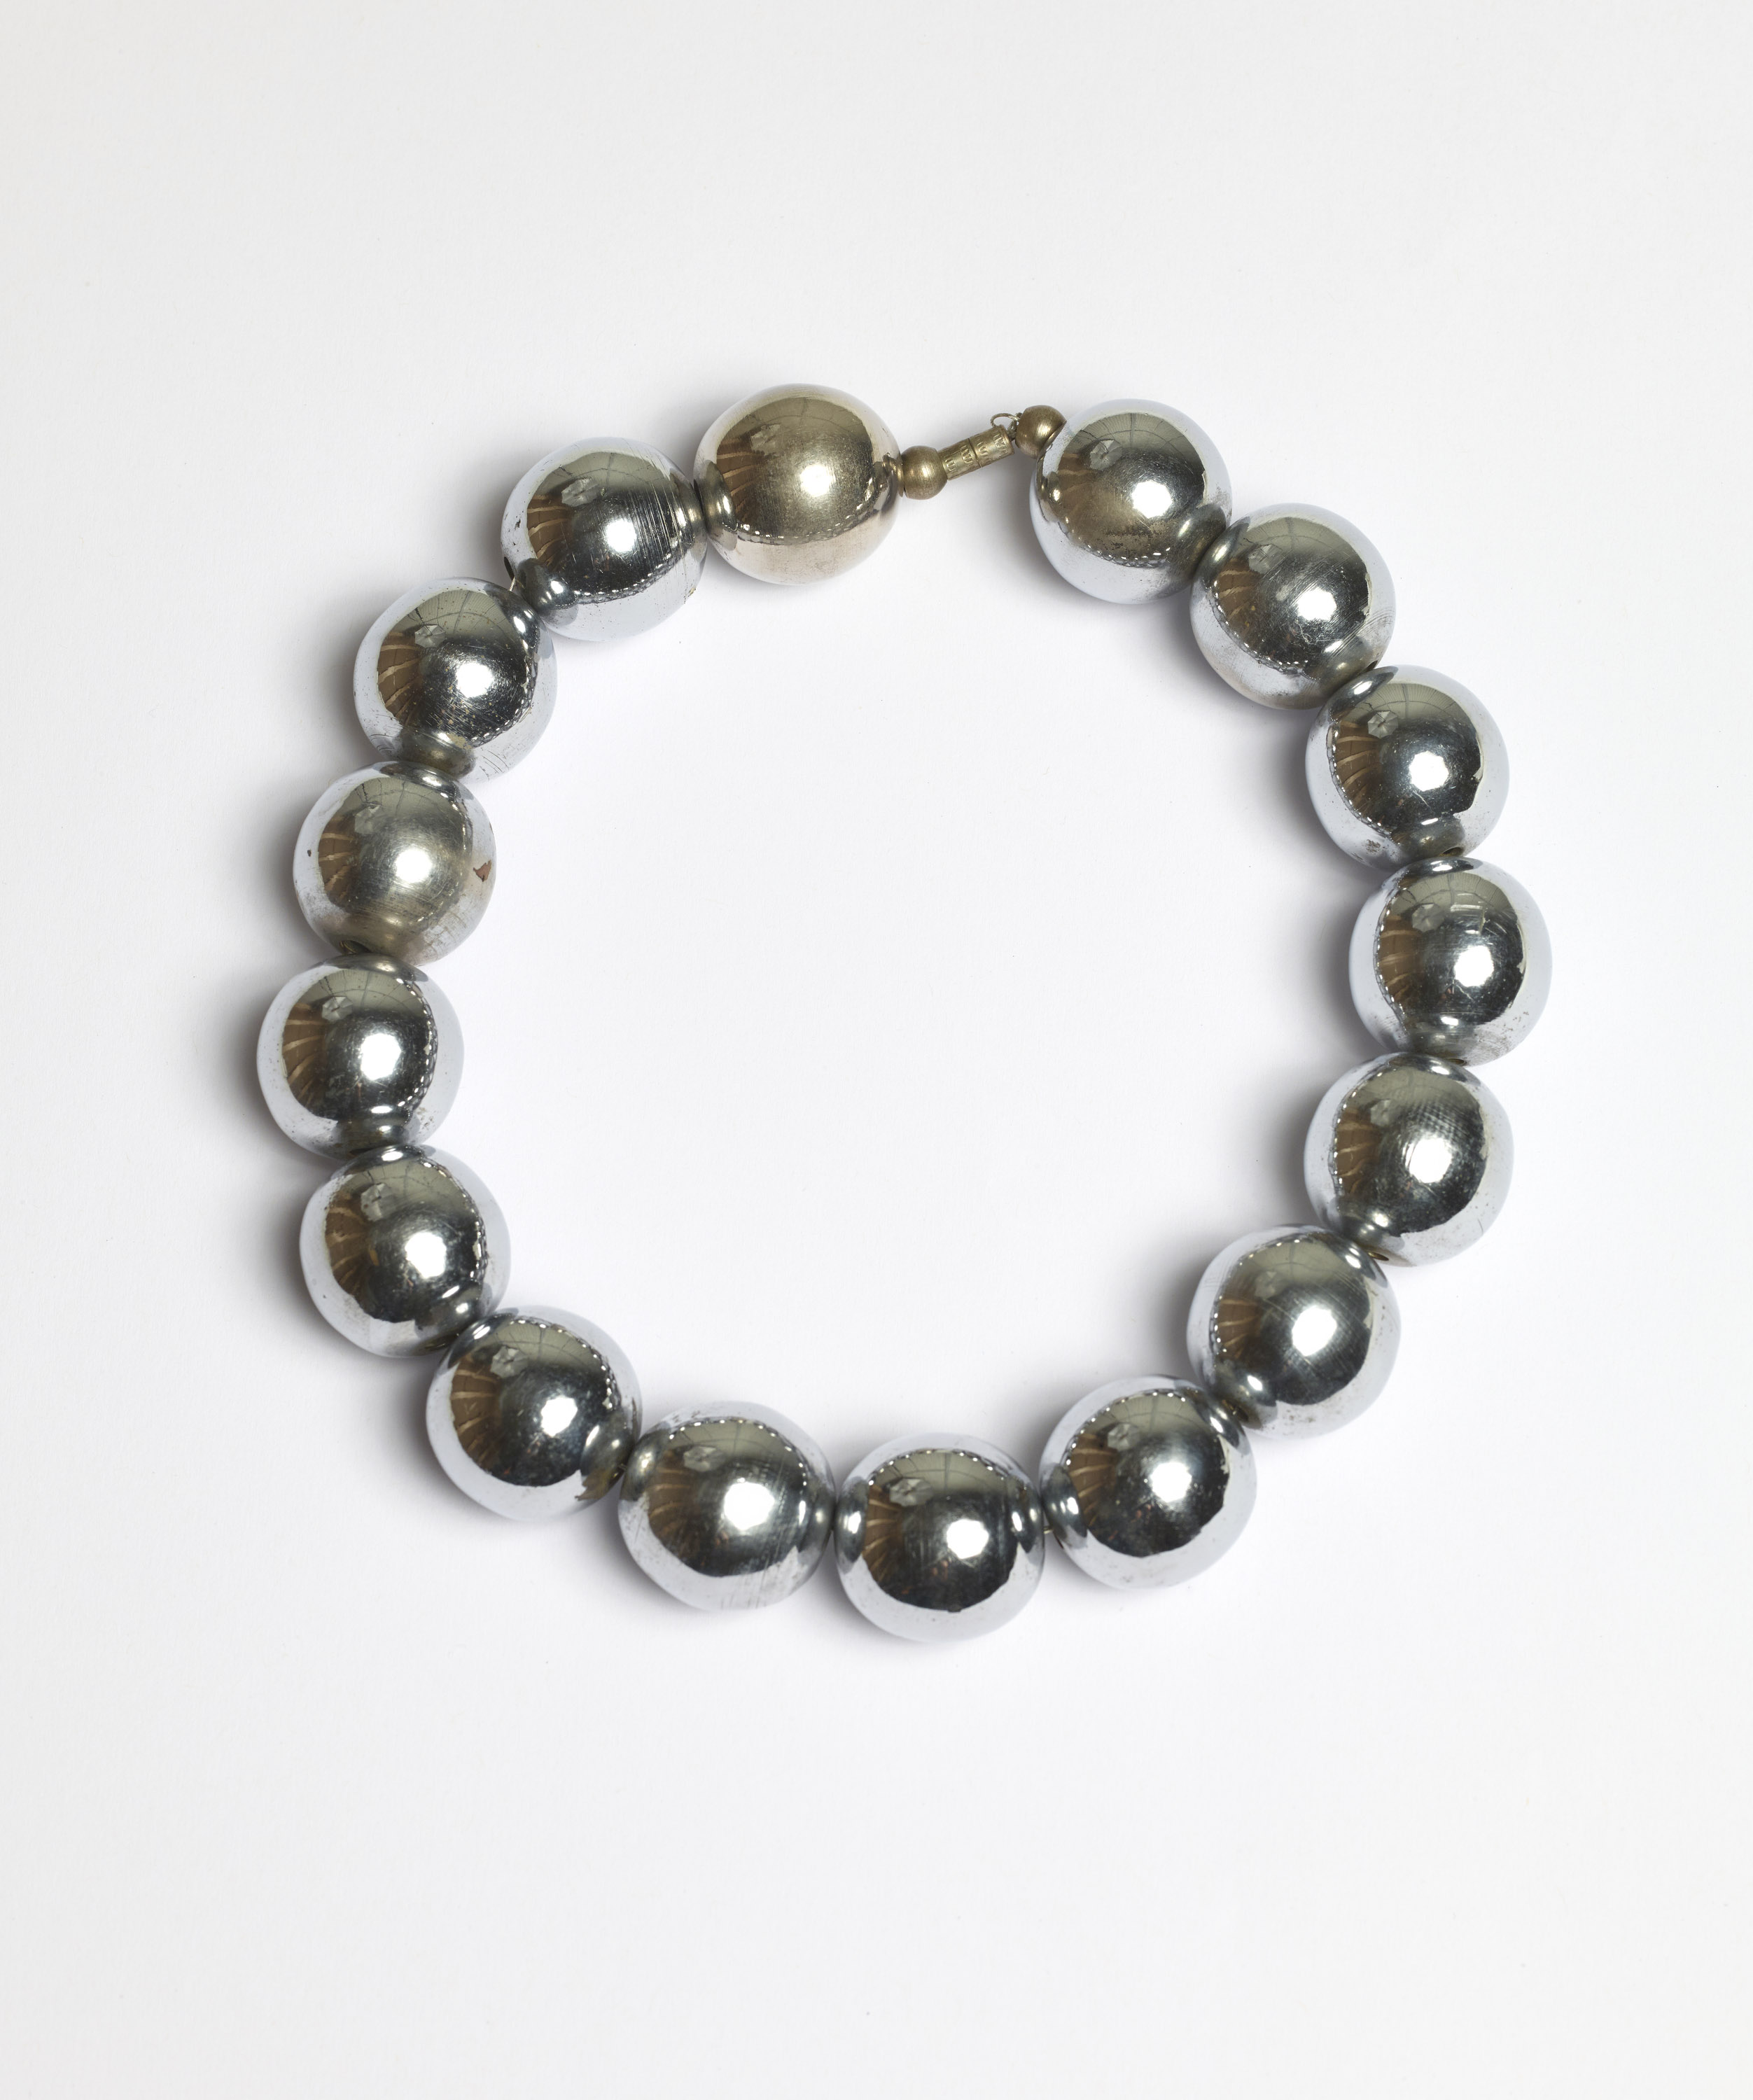 Charlotte Perriand - Ball Bearing Necklace - Sheet1